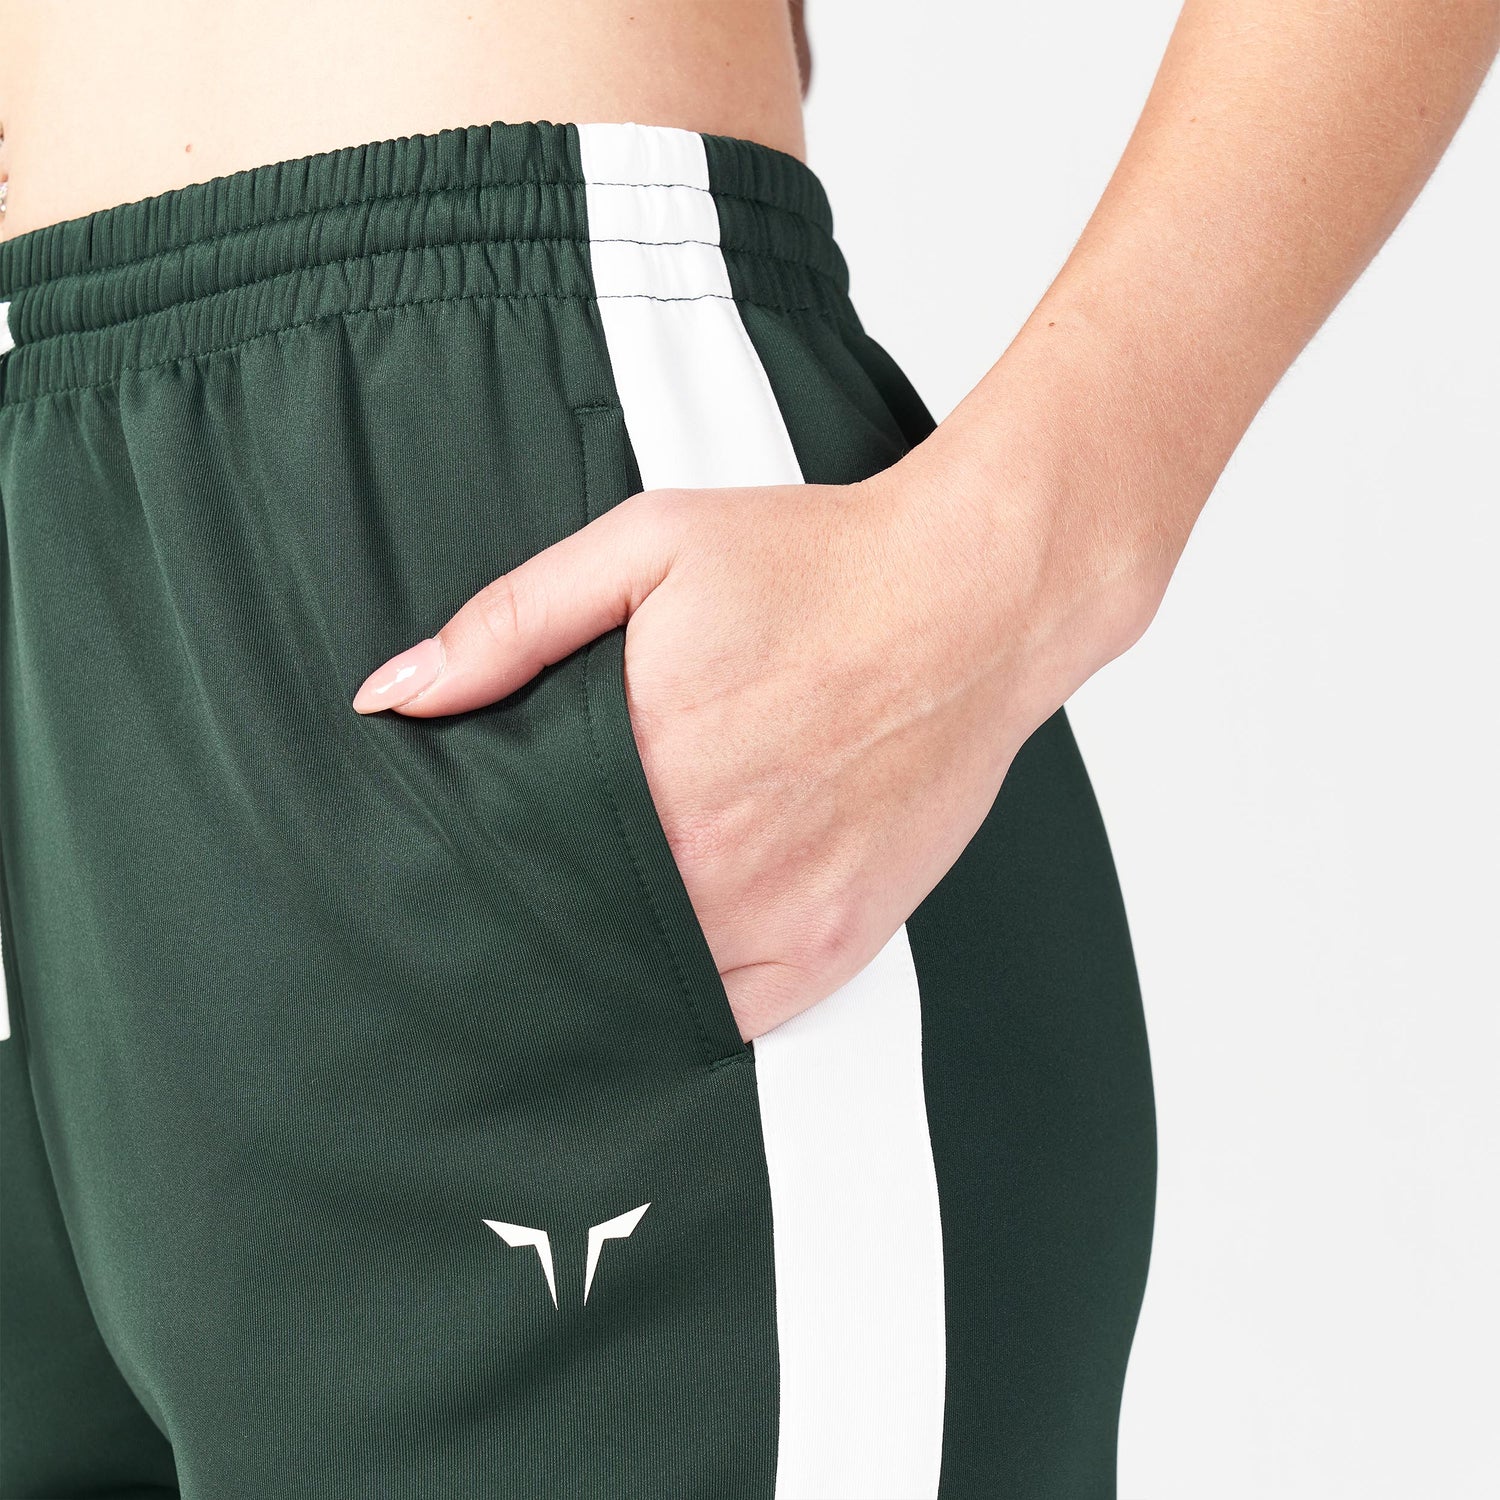 squatwolf-workout-clothes-core-tapered-pants-green-gym-pants-for-women